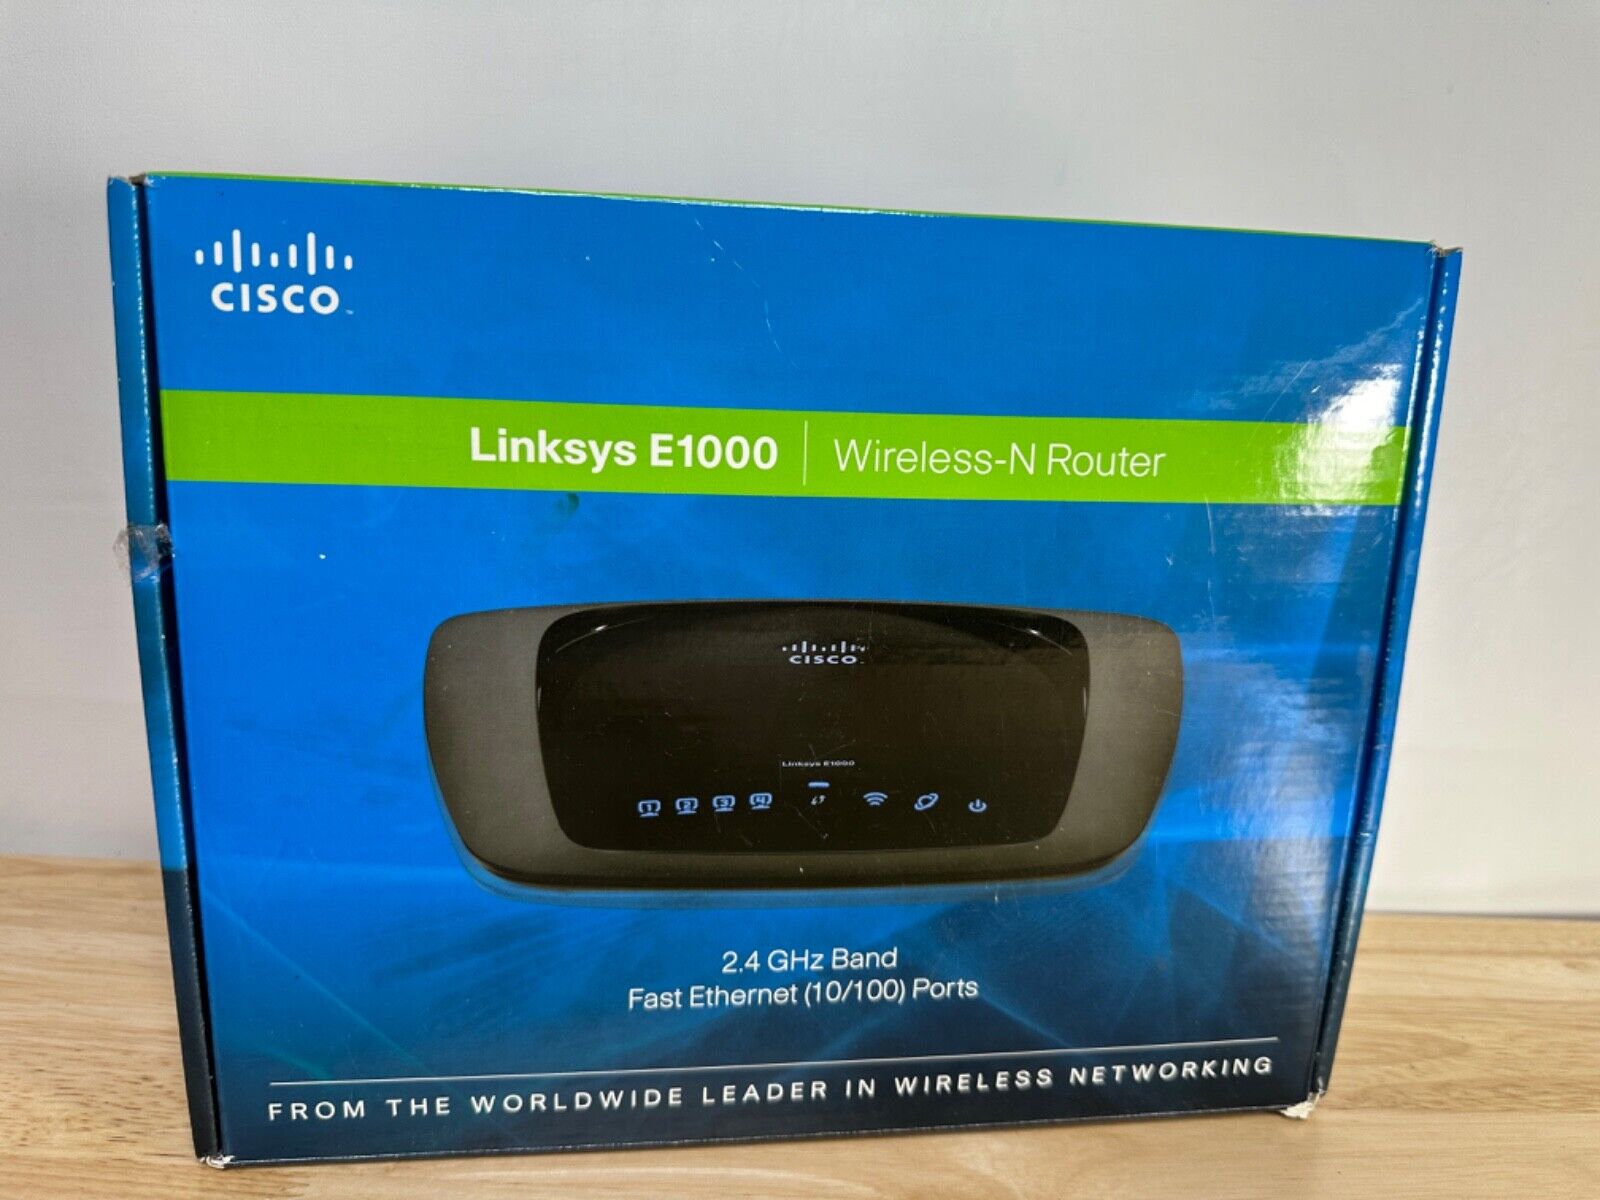 Cisco Linksys E1000 300 Mbps 4-Port 10/100 Wireless N G Router